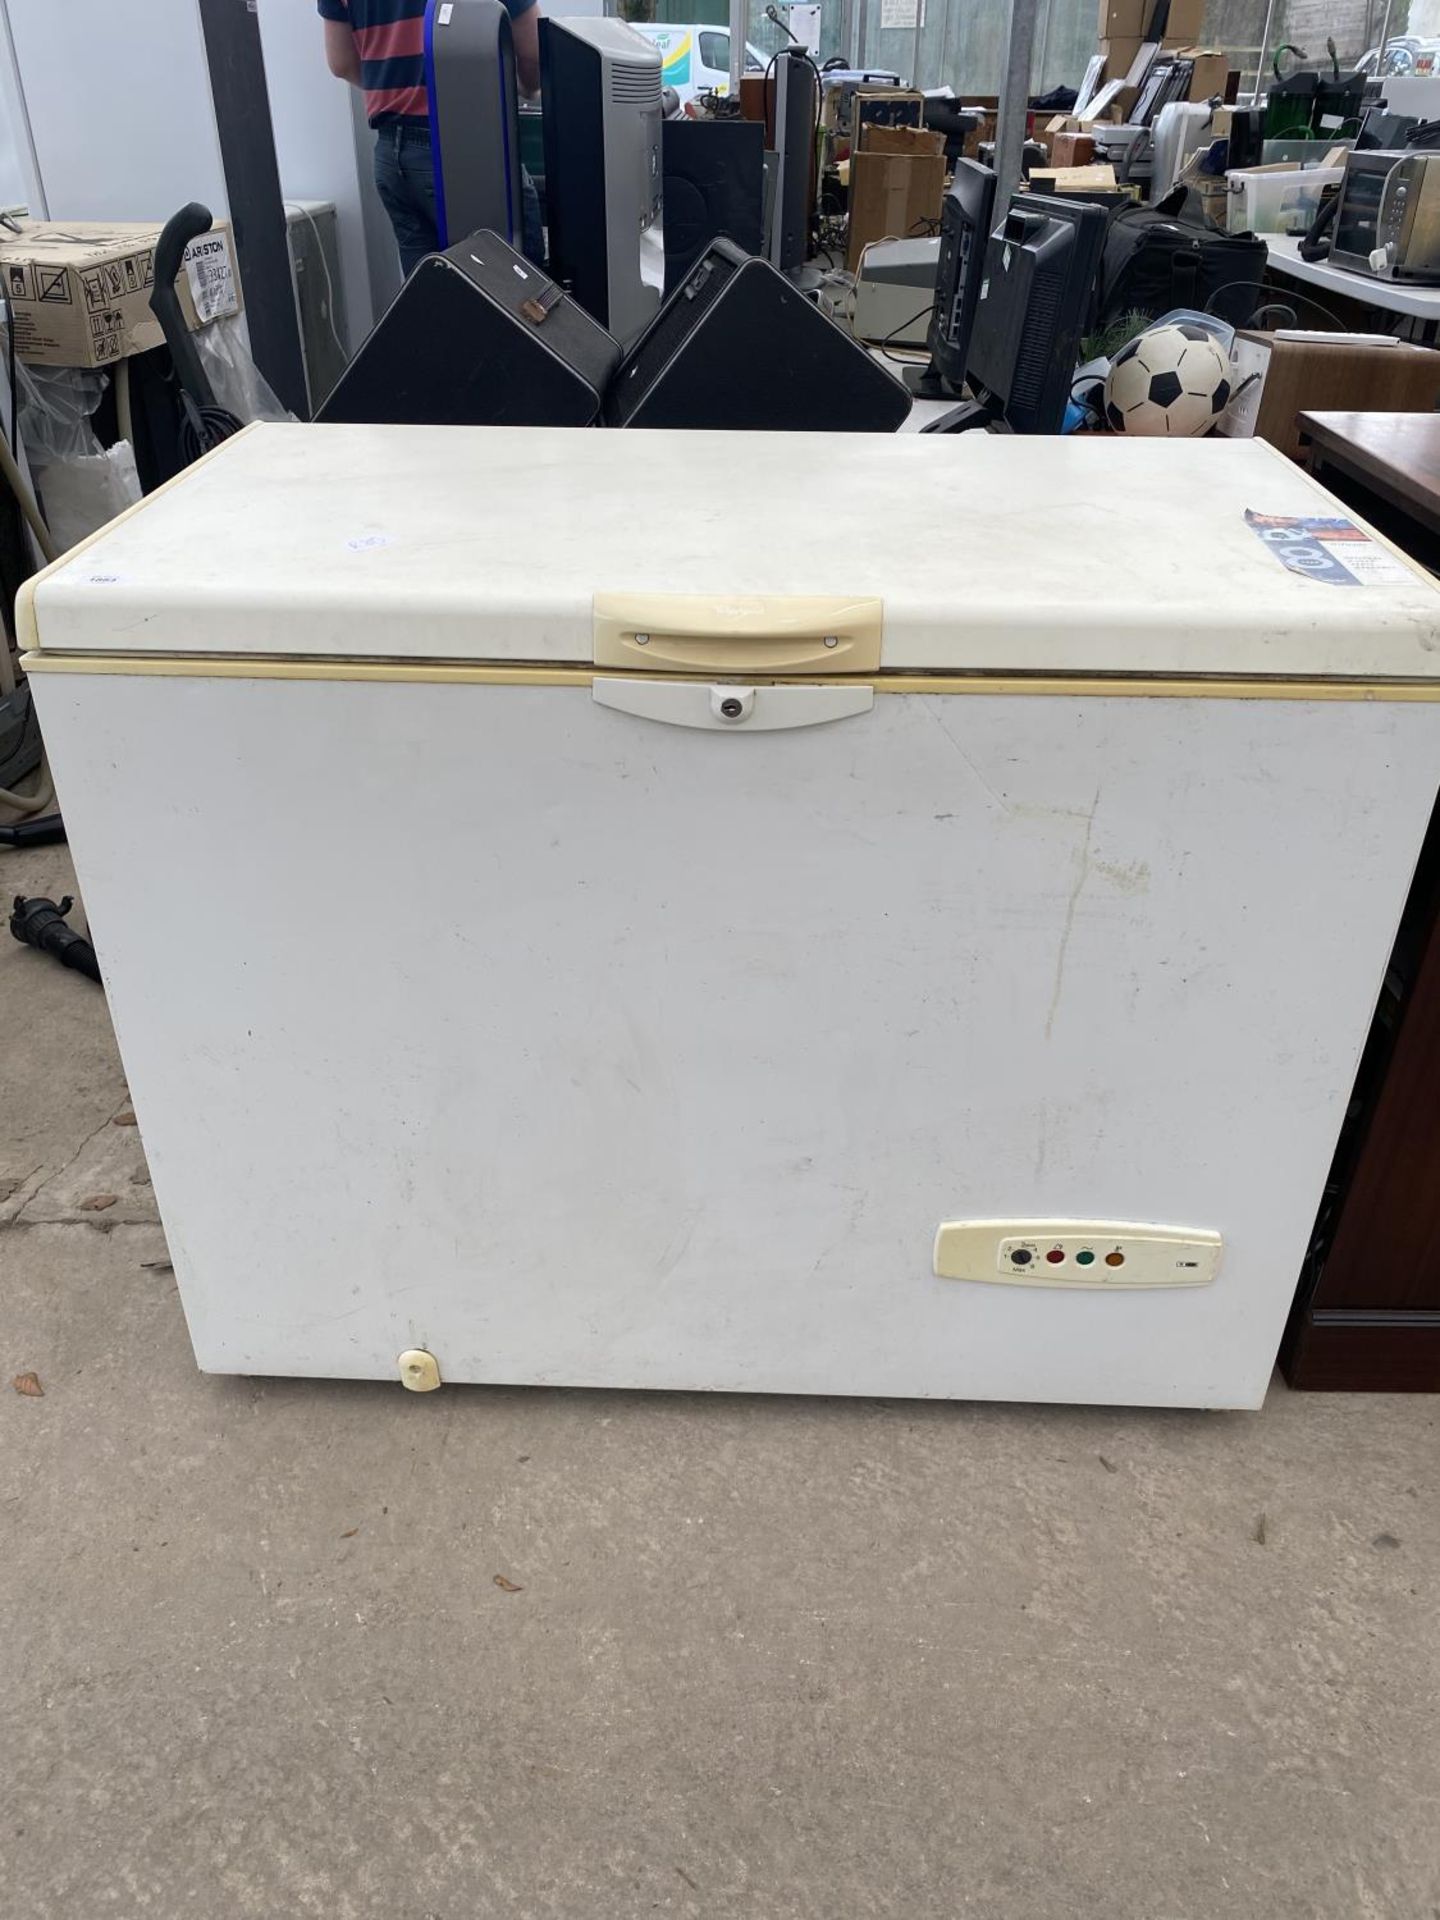 A WHITE (4FT APPROX) INFINITI CHEST FREEZER BELIEVED IN WORKING ORDER BUT NO WARRANTY